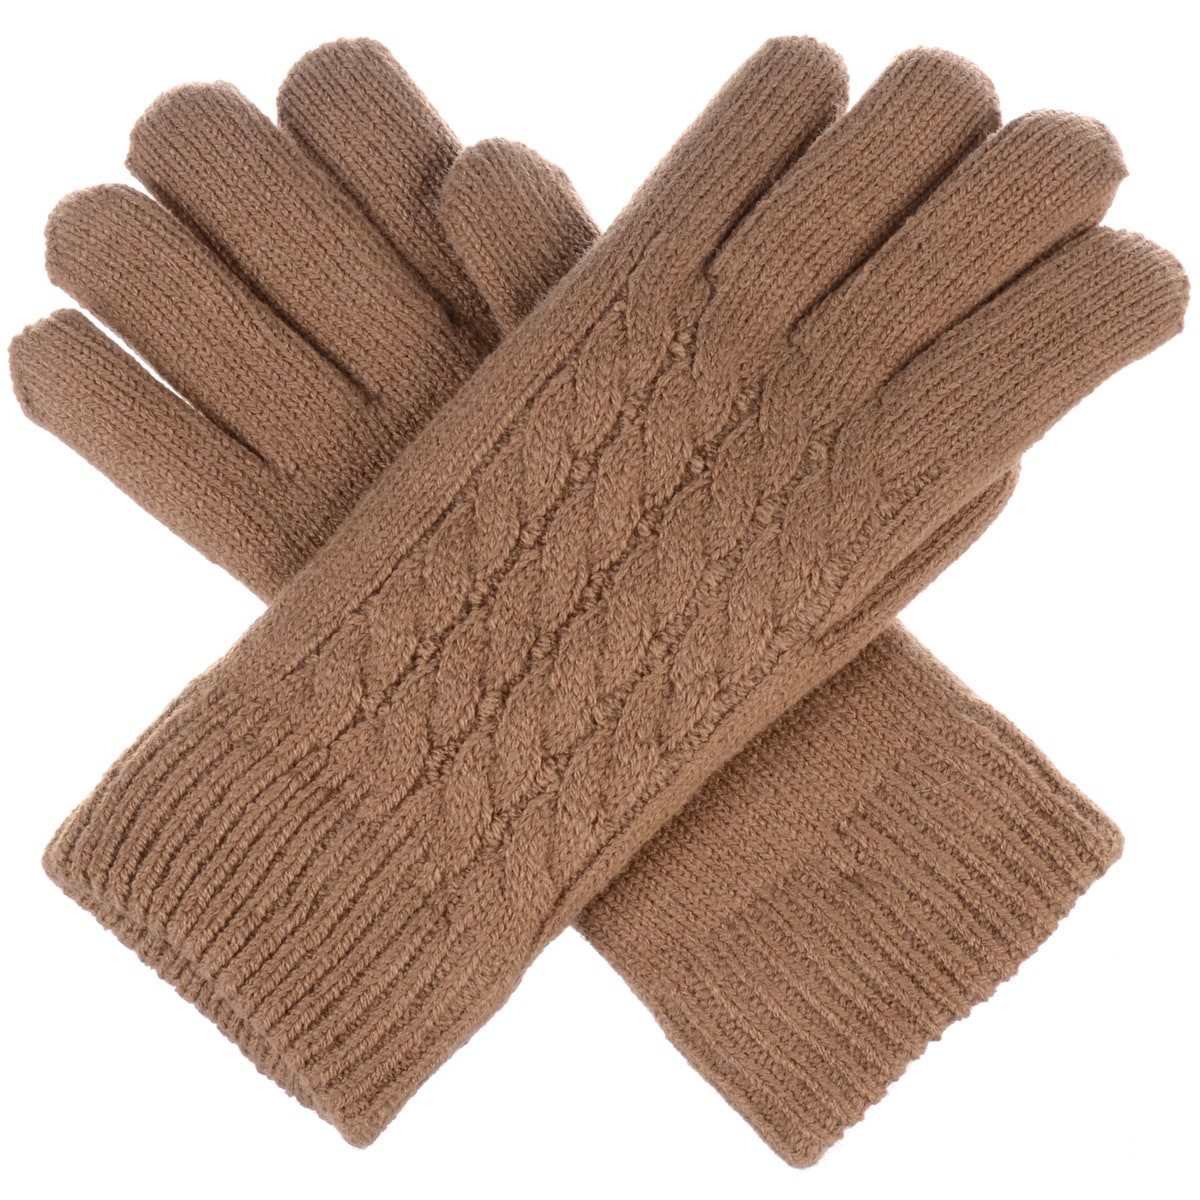 BYOS Women’s Winter Classic Cable Warm Plush Fleece Lined Knit Gloves 